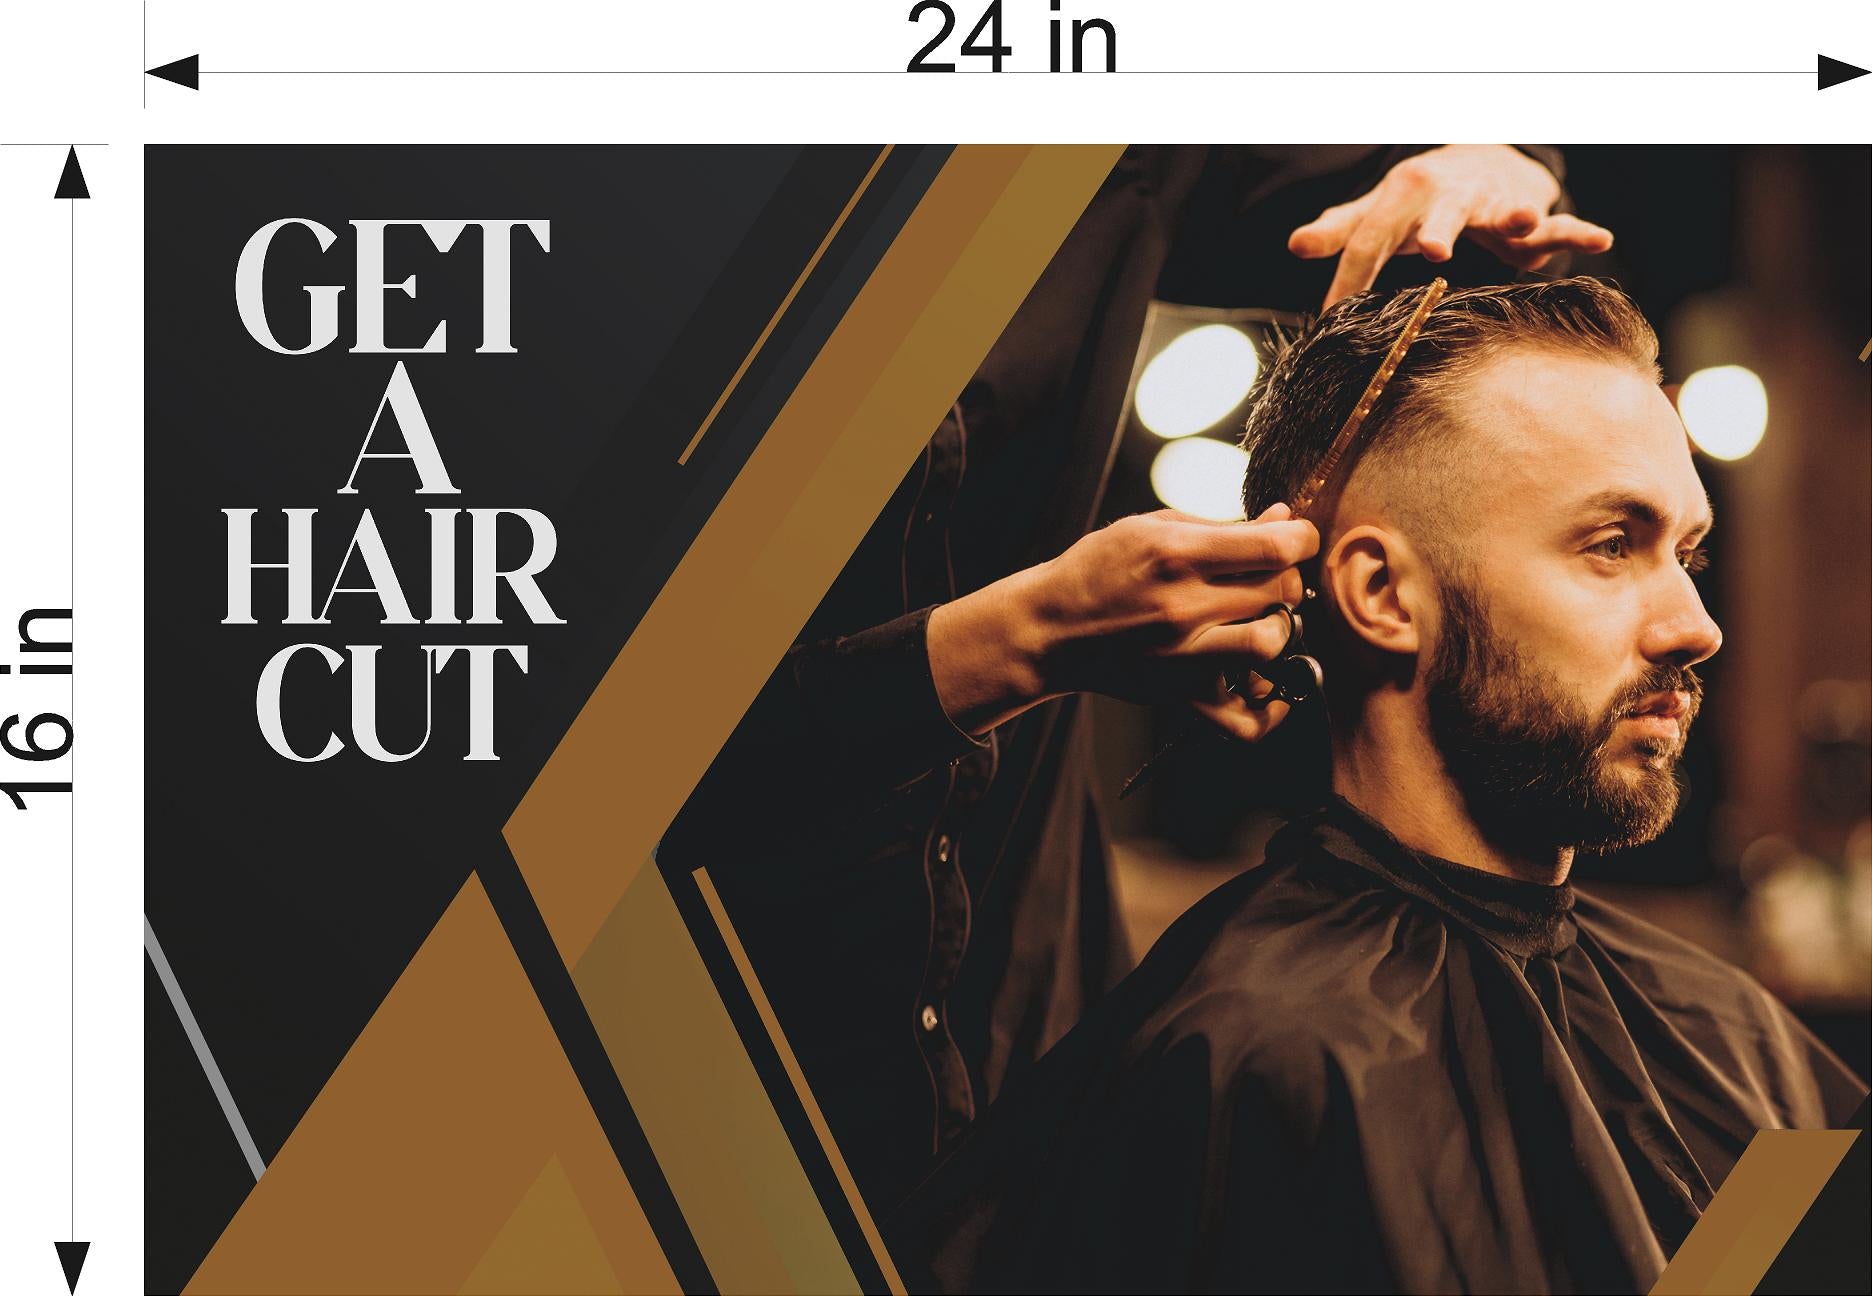 Haircutting weeks 5 & 6 | PPT